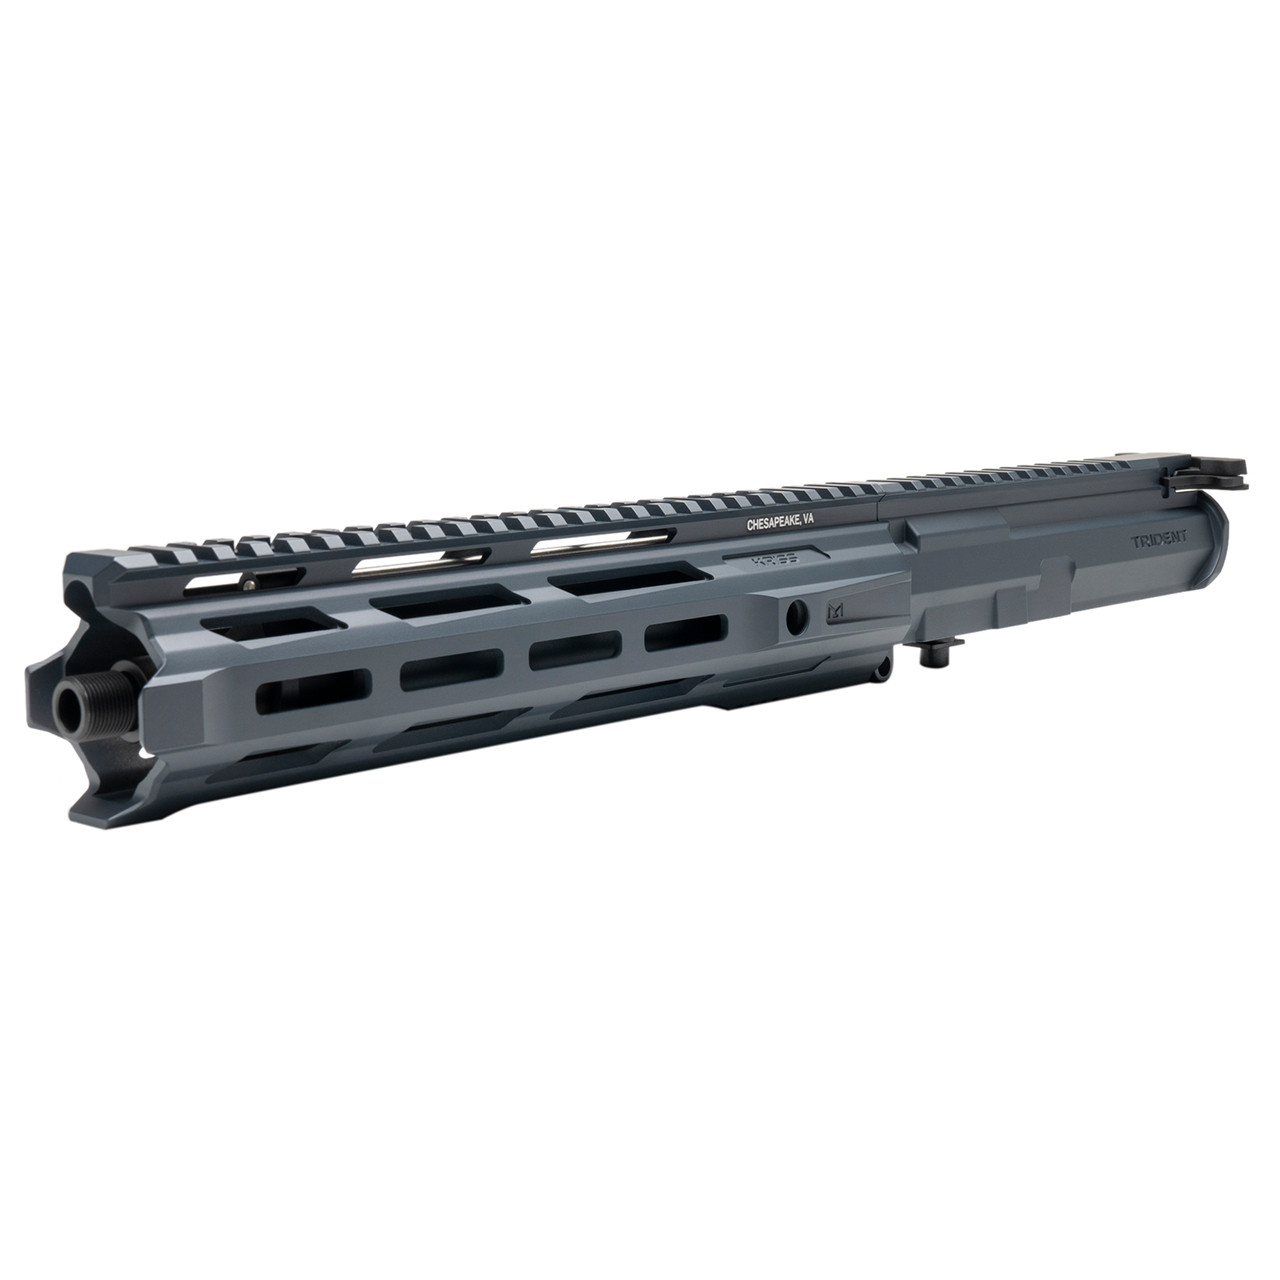 Shop Trident MK2 CRB-M Complete Upper Assembly / CG - $ 230 - Krytac.com | For Airsoft Use Only.